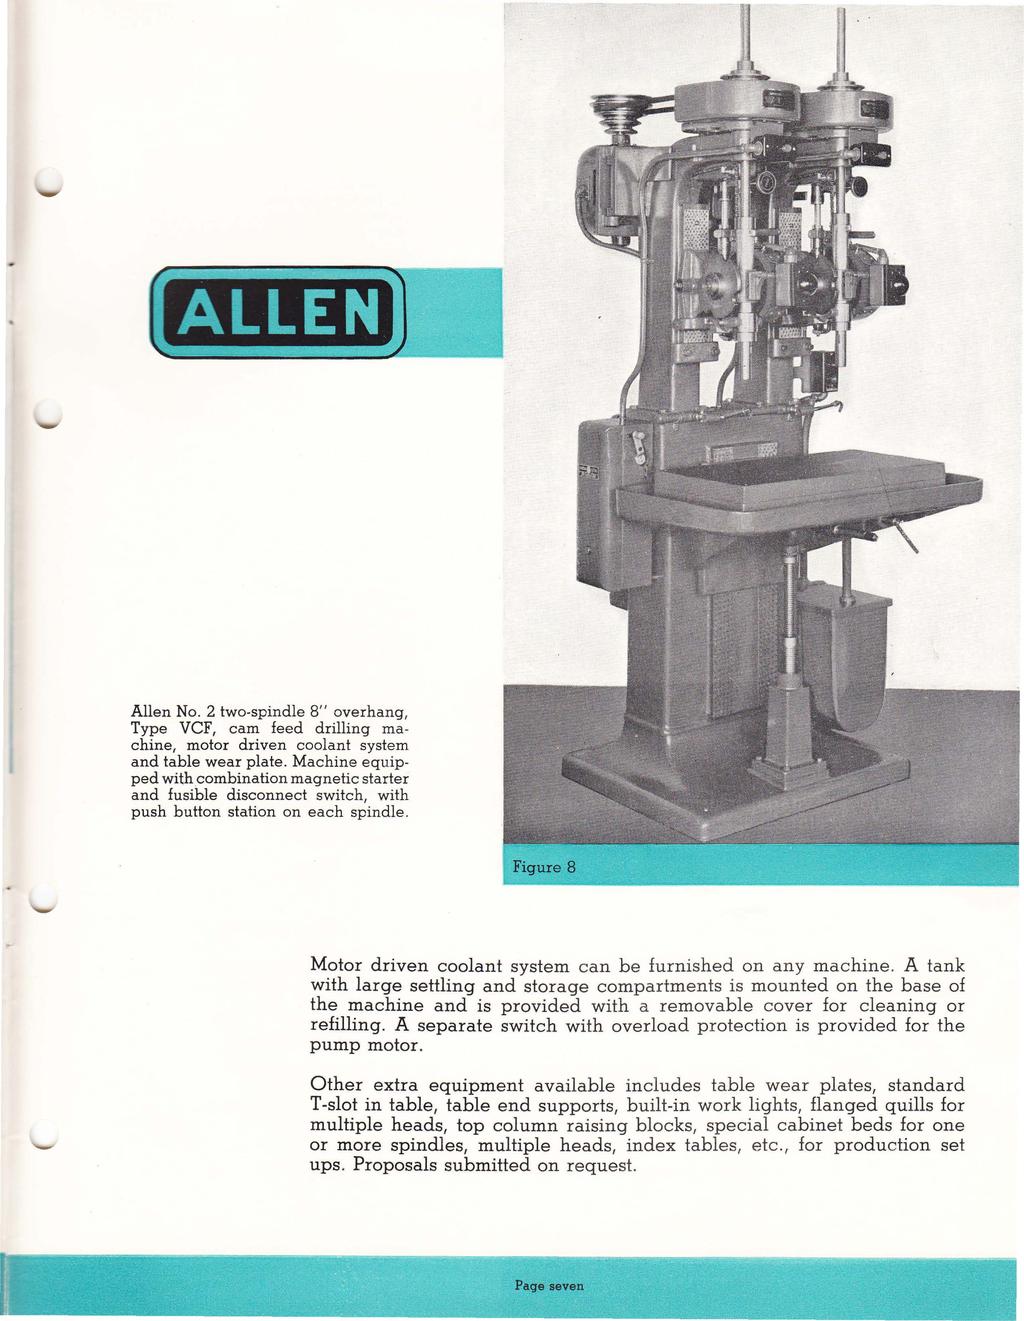 ALLEN Allen No. 2 two-spindle 8" overhang, Type VCF, cam feed drilling machine, motor driven coolant system and table wear plate.